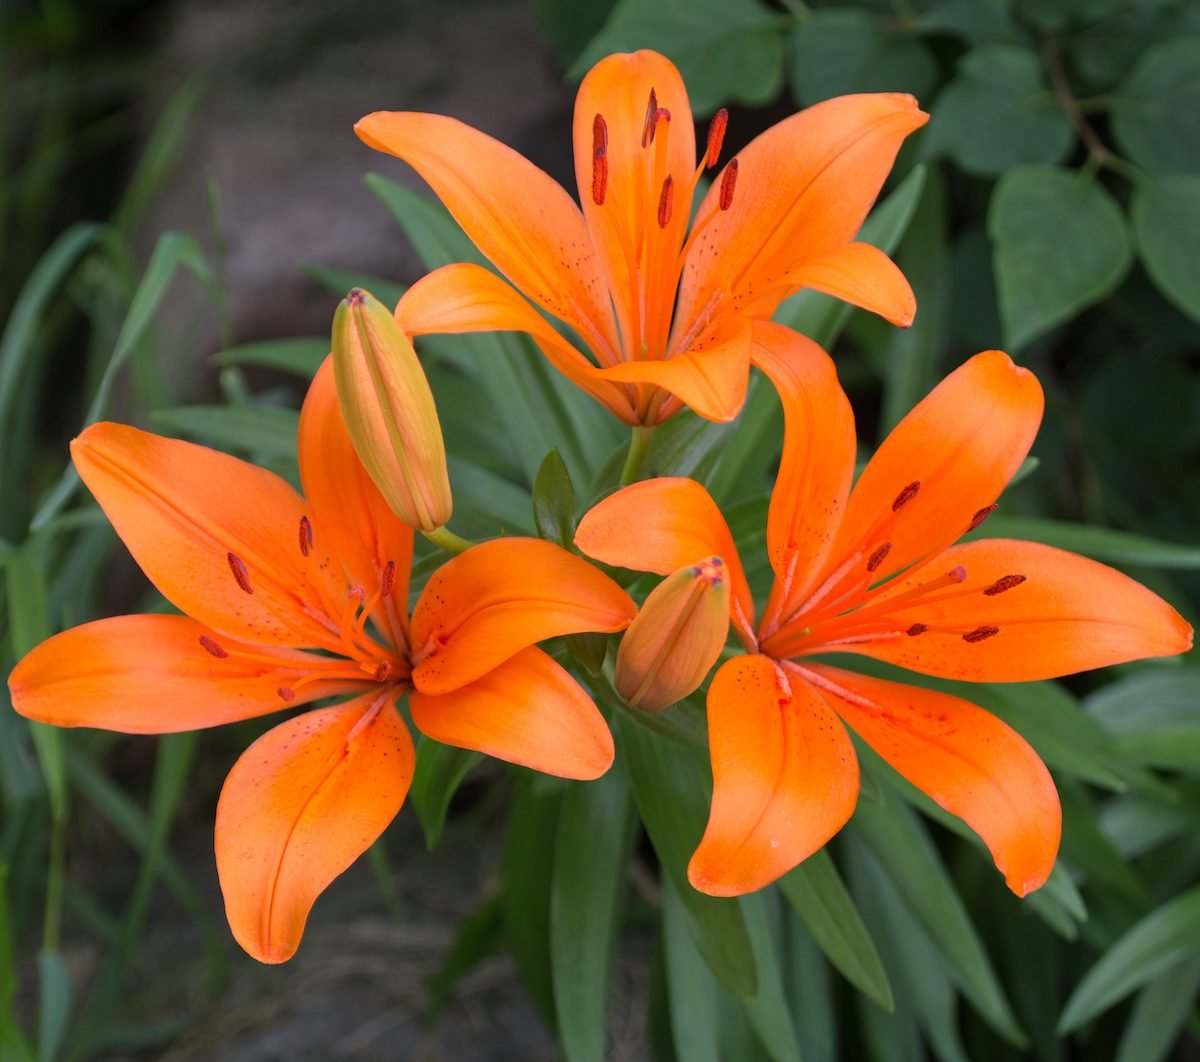 12 Lovely Pictures of Lilies You Need to See - Birds and Blooms